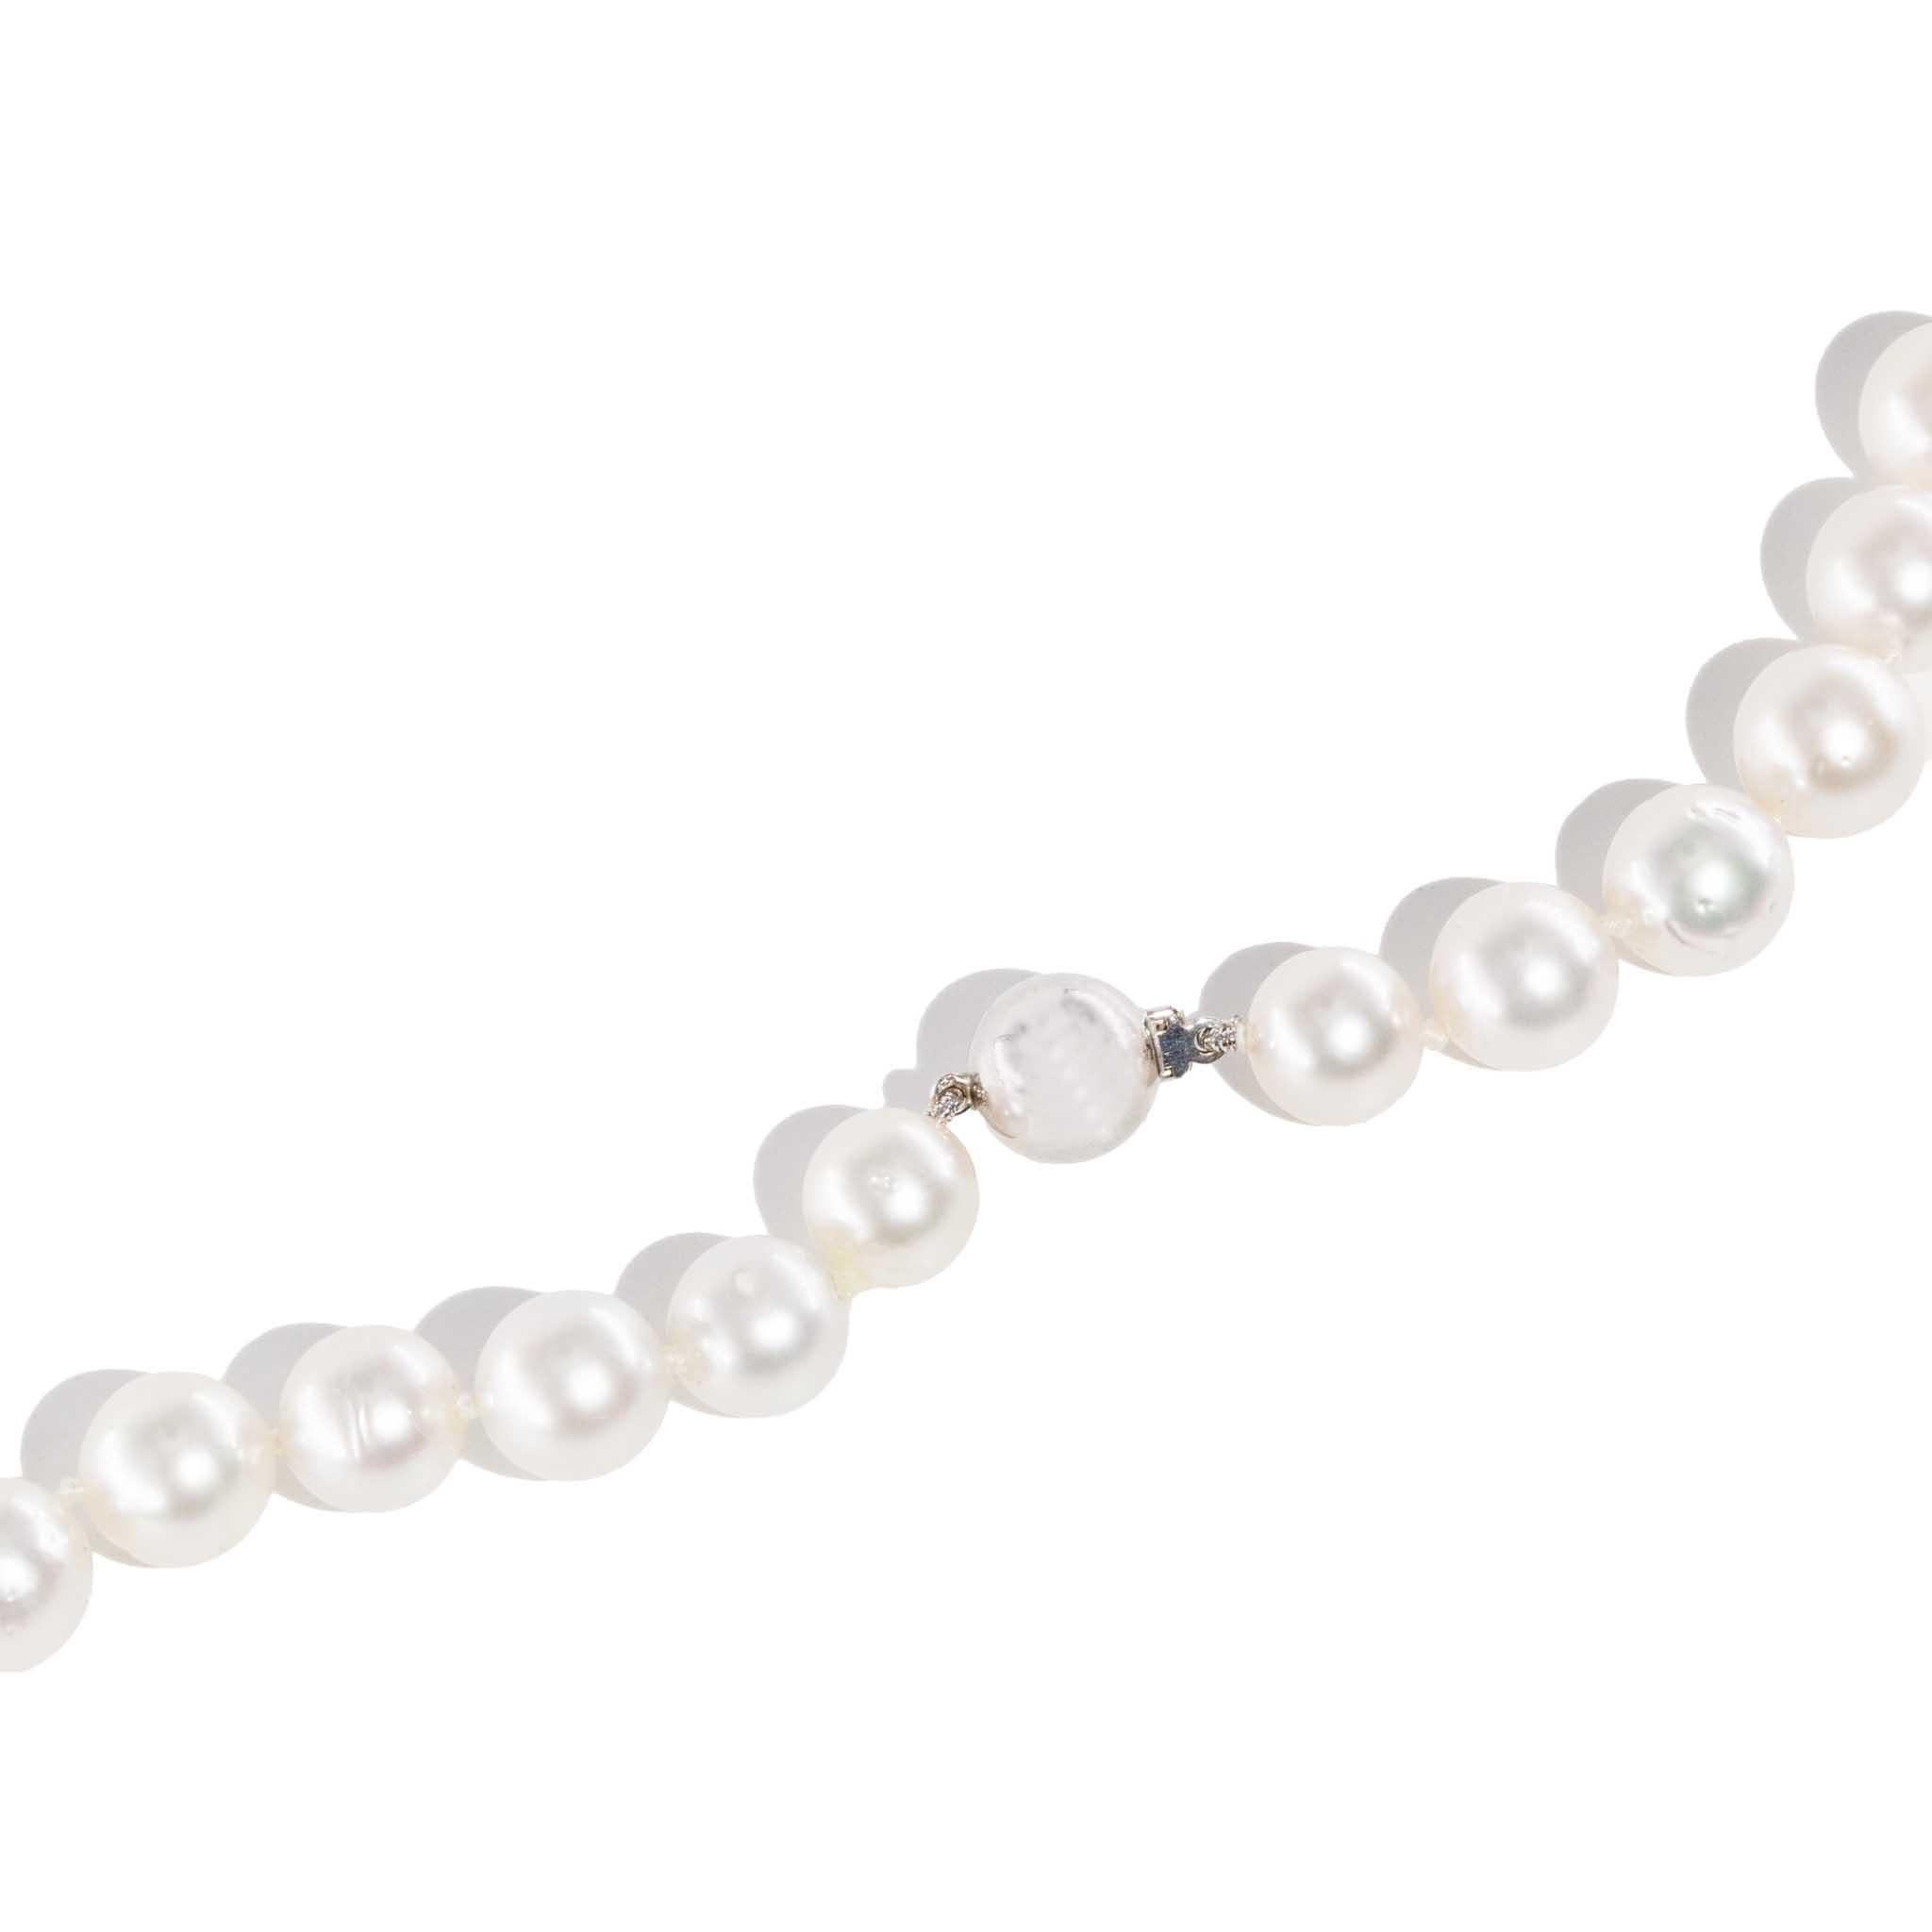 Vintage Circa 1990s South Sea Pearl Strand Necklace 18 Carat White Gold Clasp For Sale 1